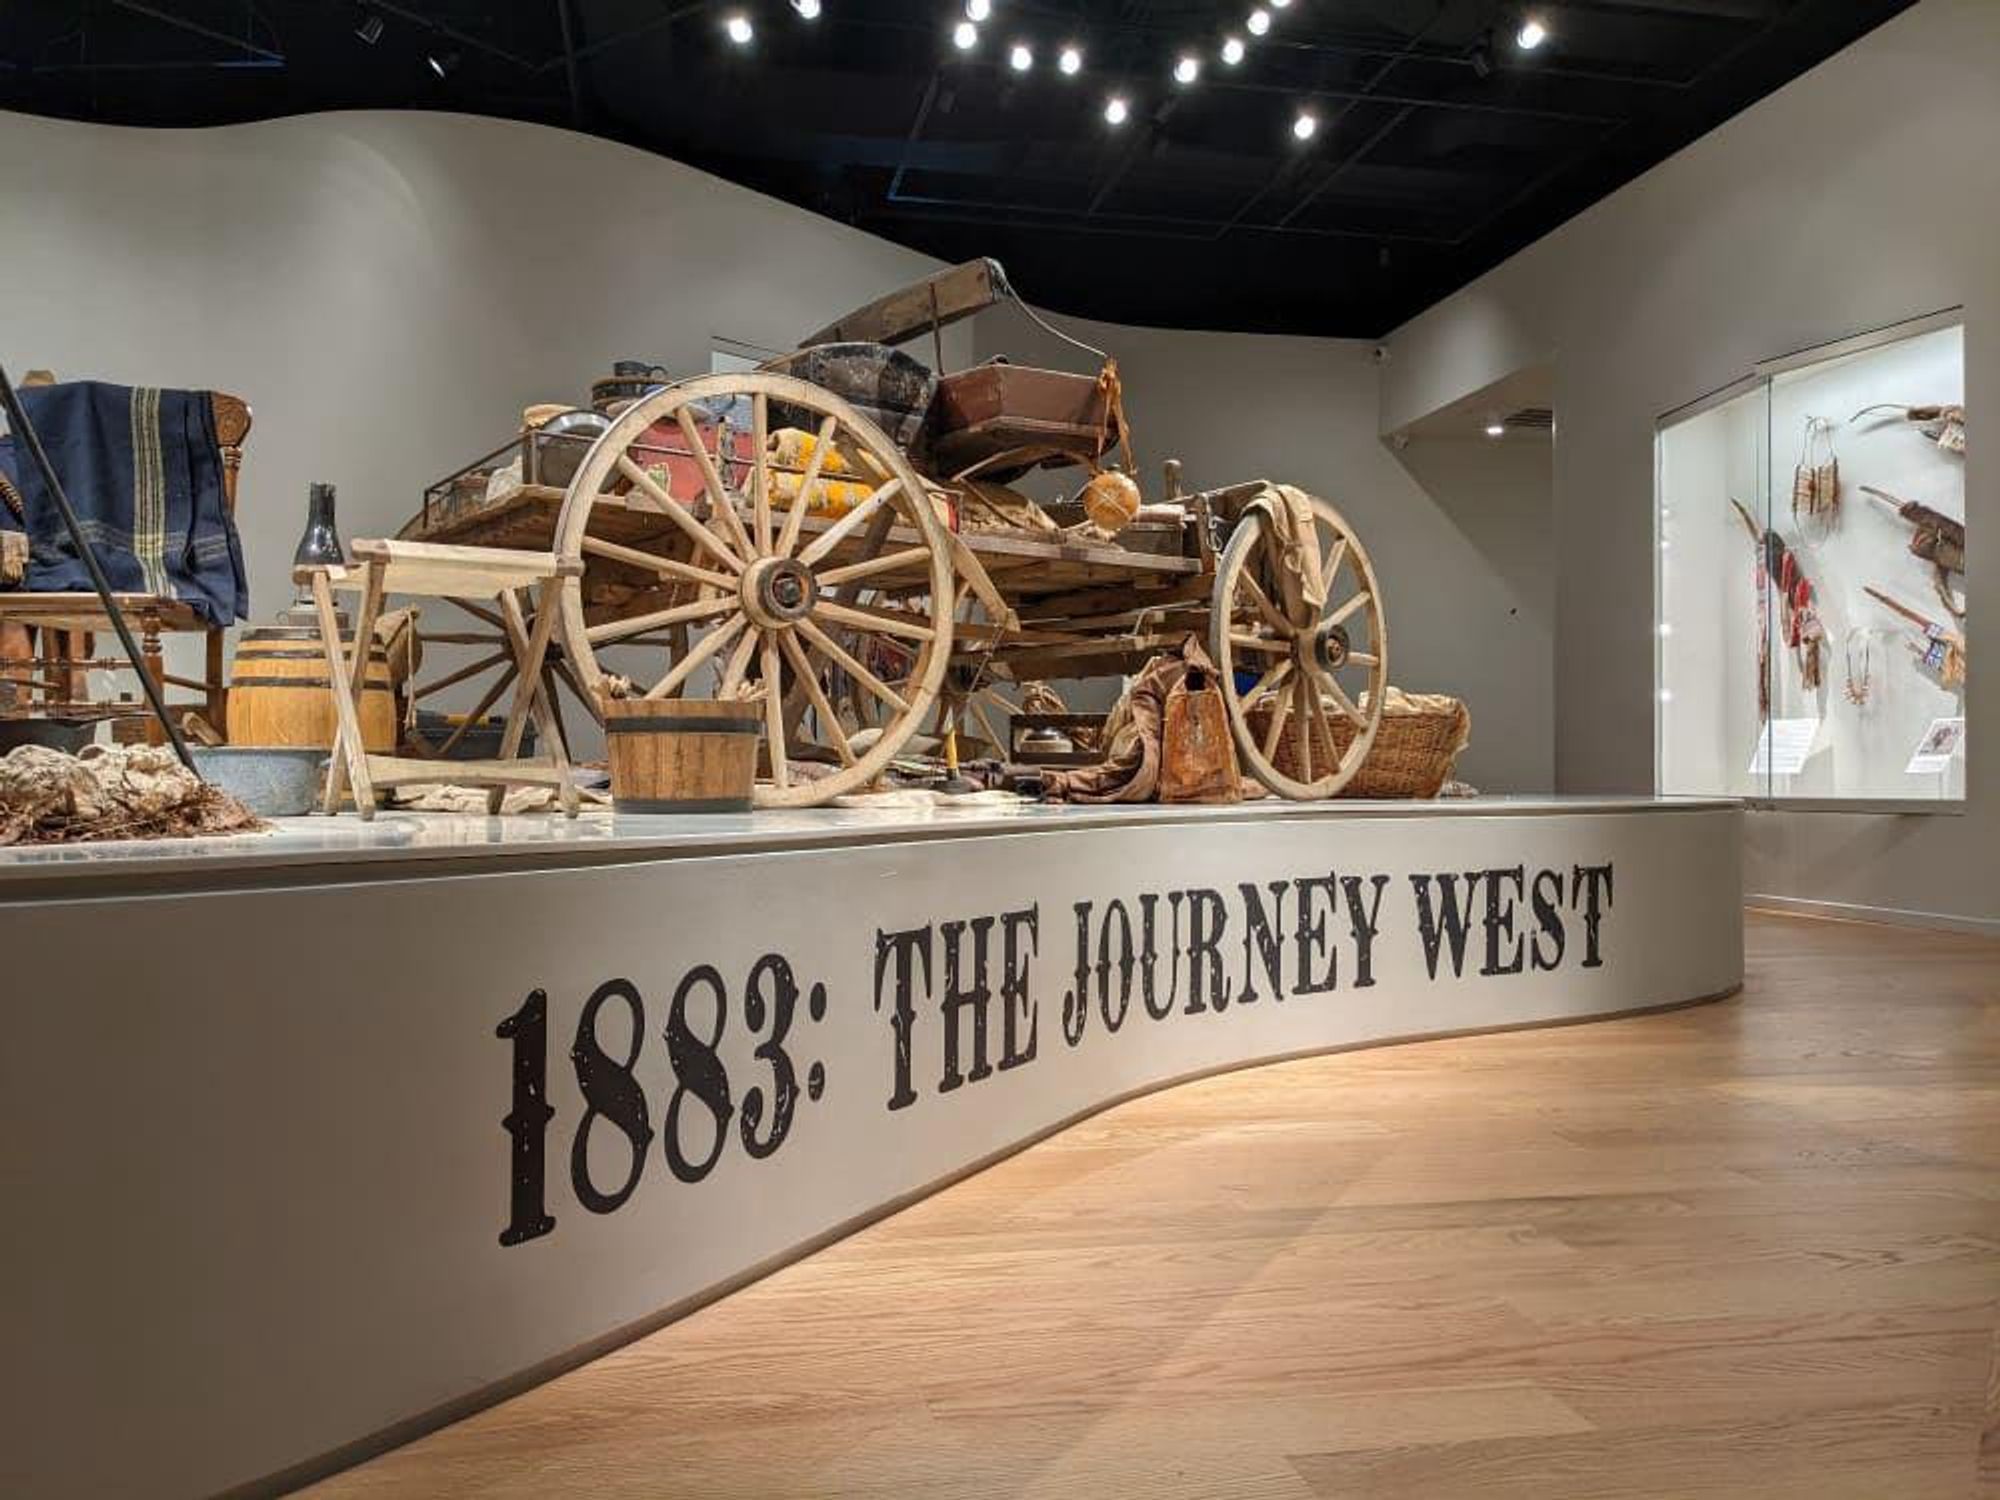 "1883: The Journey West" wraps up at the National Cowgirl Museum on April 17.